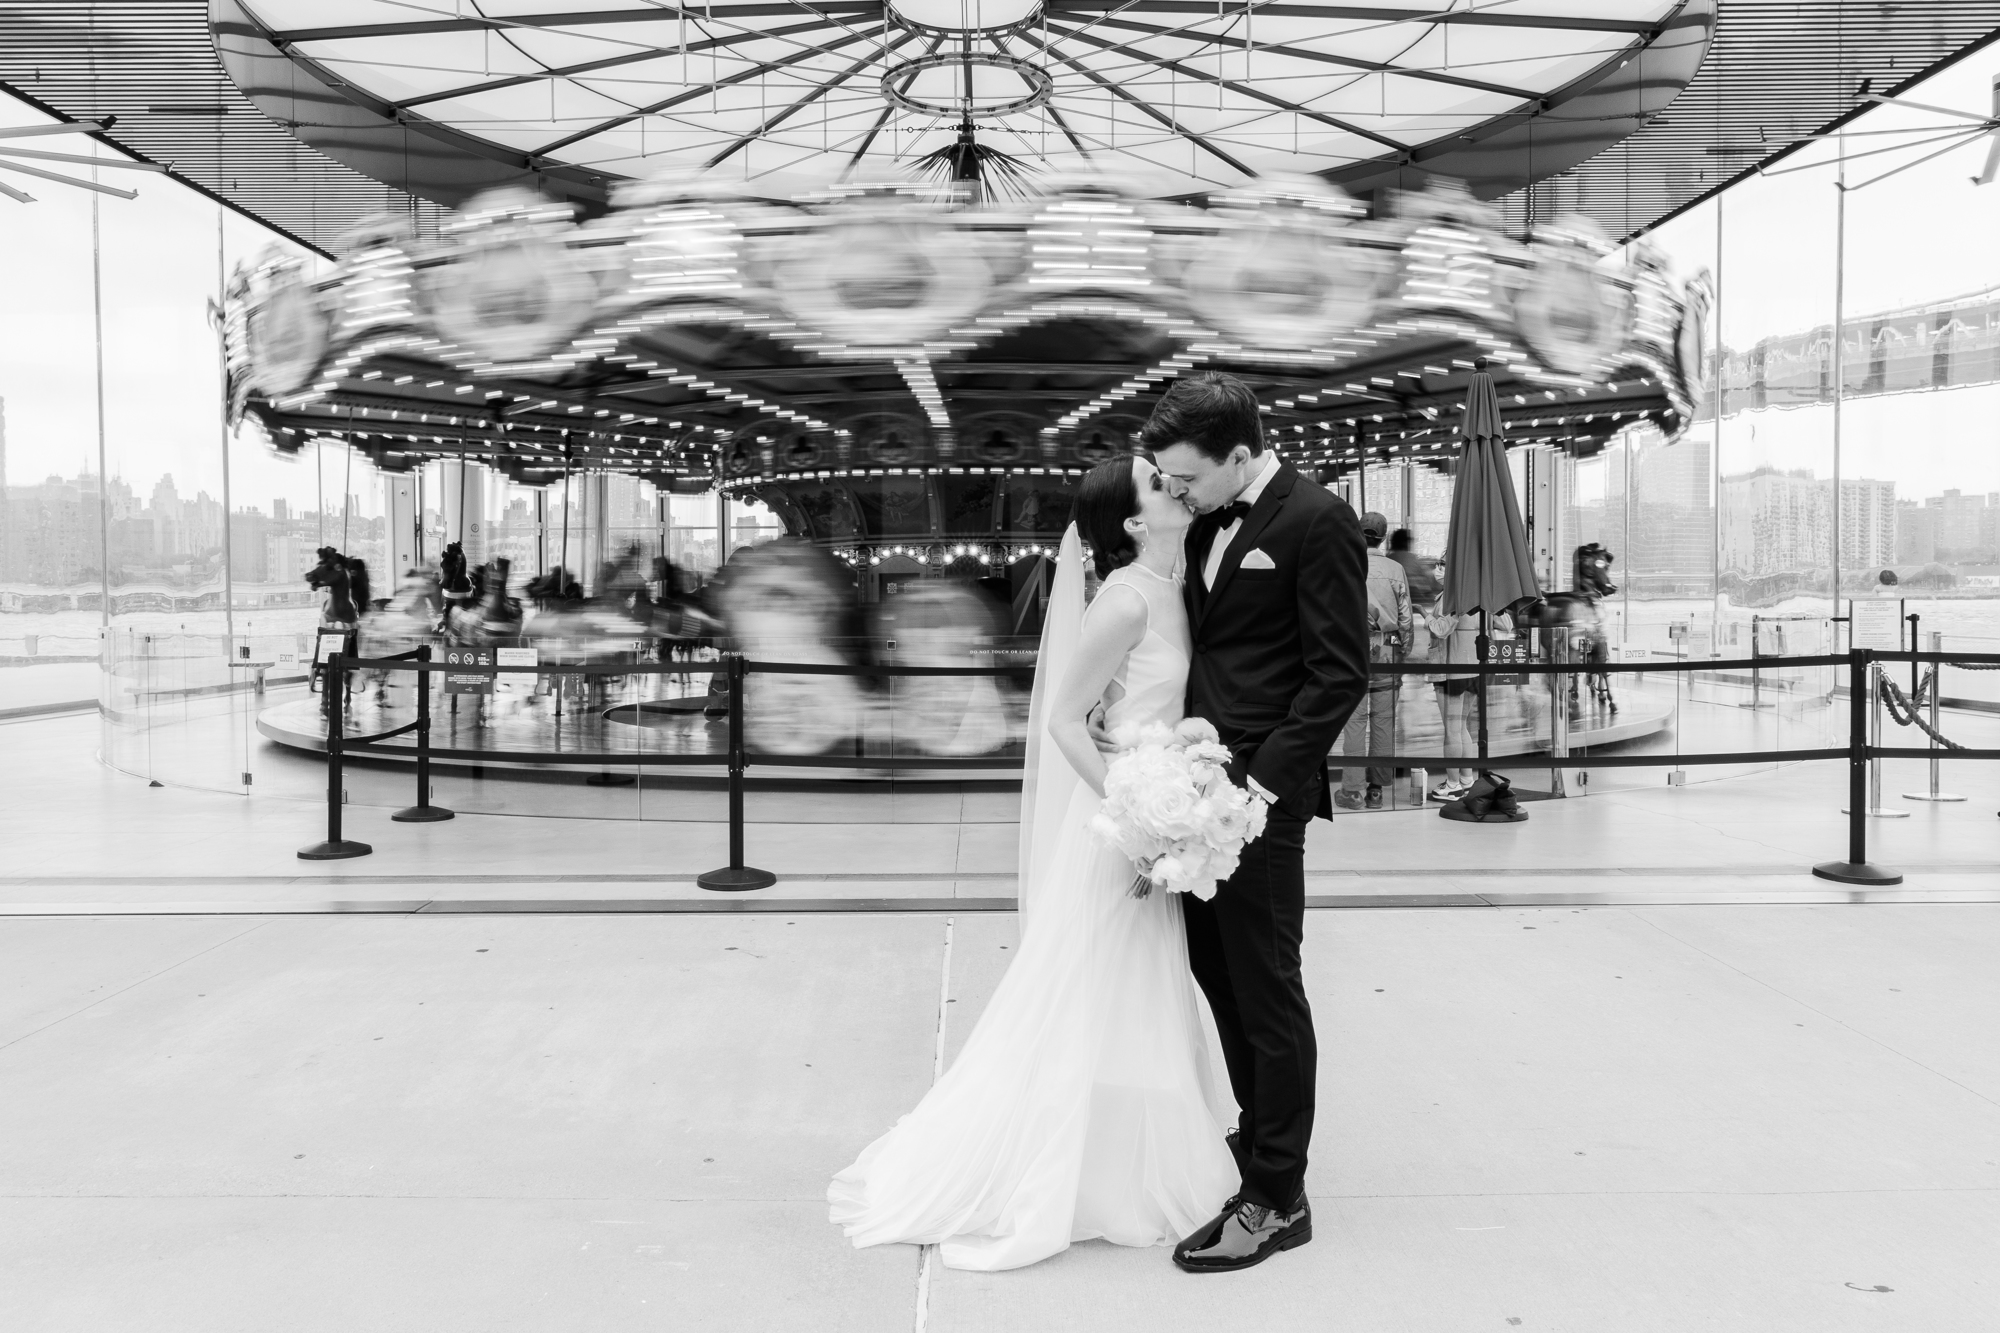 Black and white DUMBO, Brooklyn Wedding Photos at Smack Mellon and Jane's Carousel